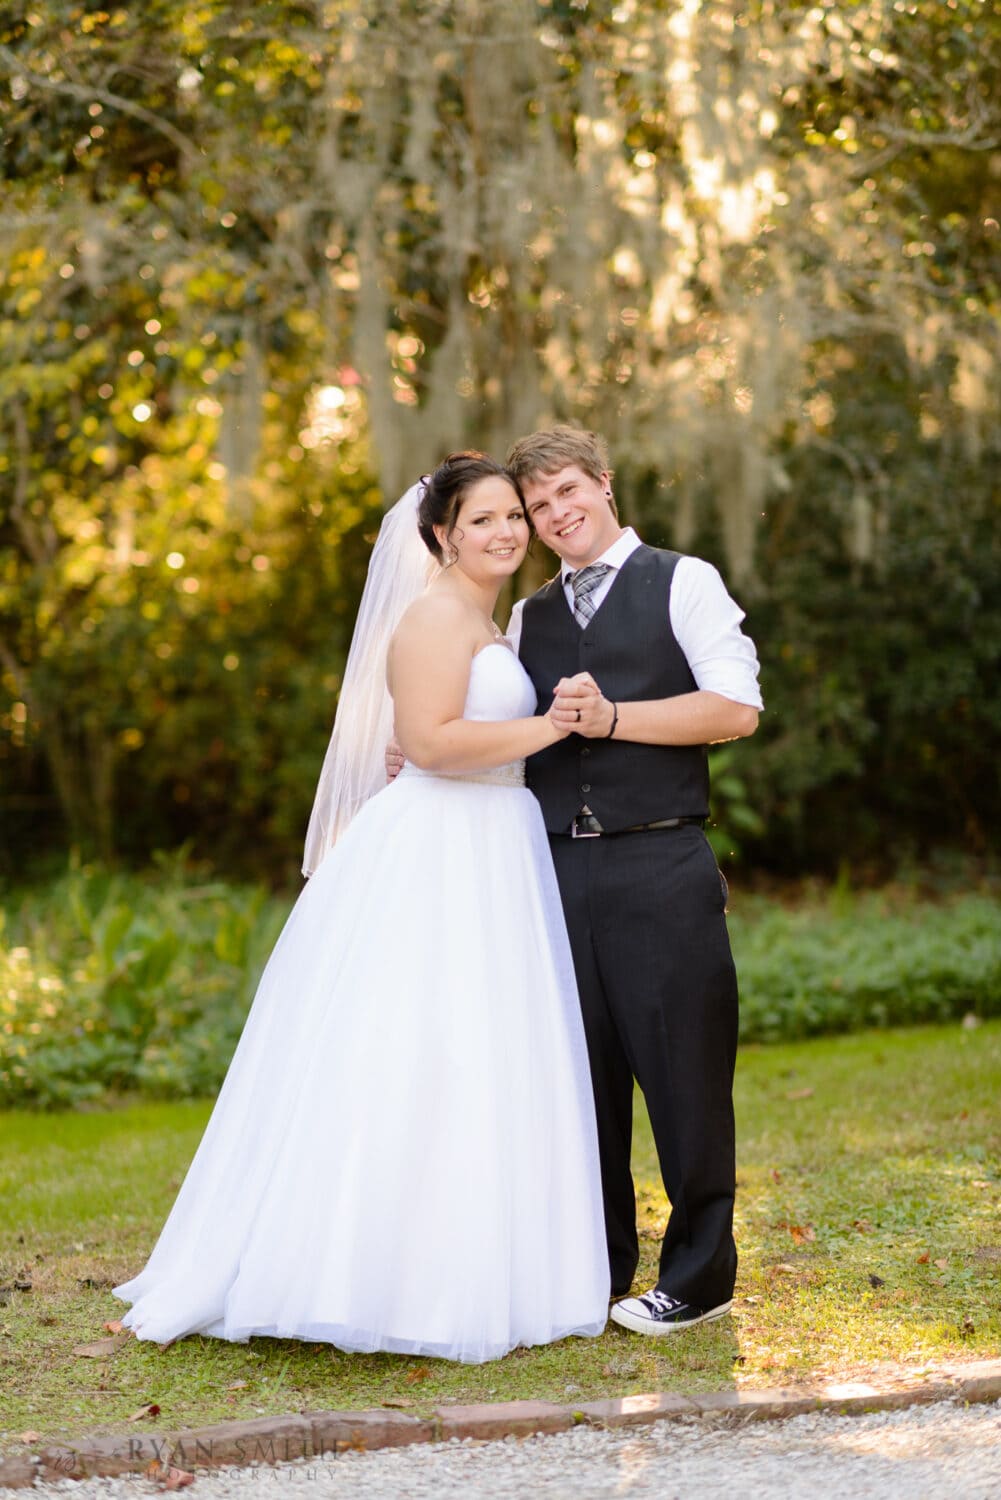 Bride and groom after the ceremony under the moss - Magnolia Plantation